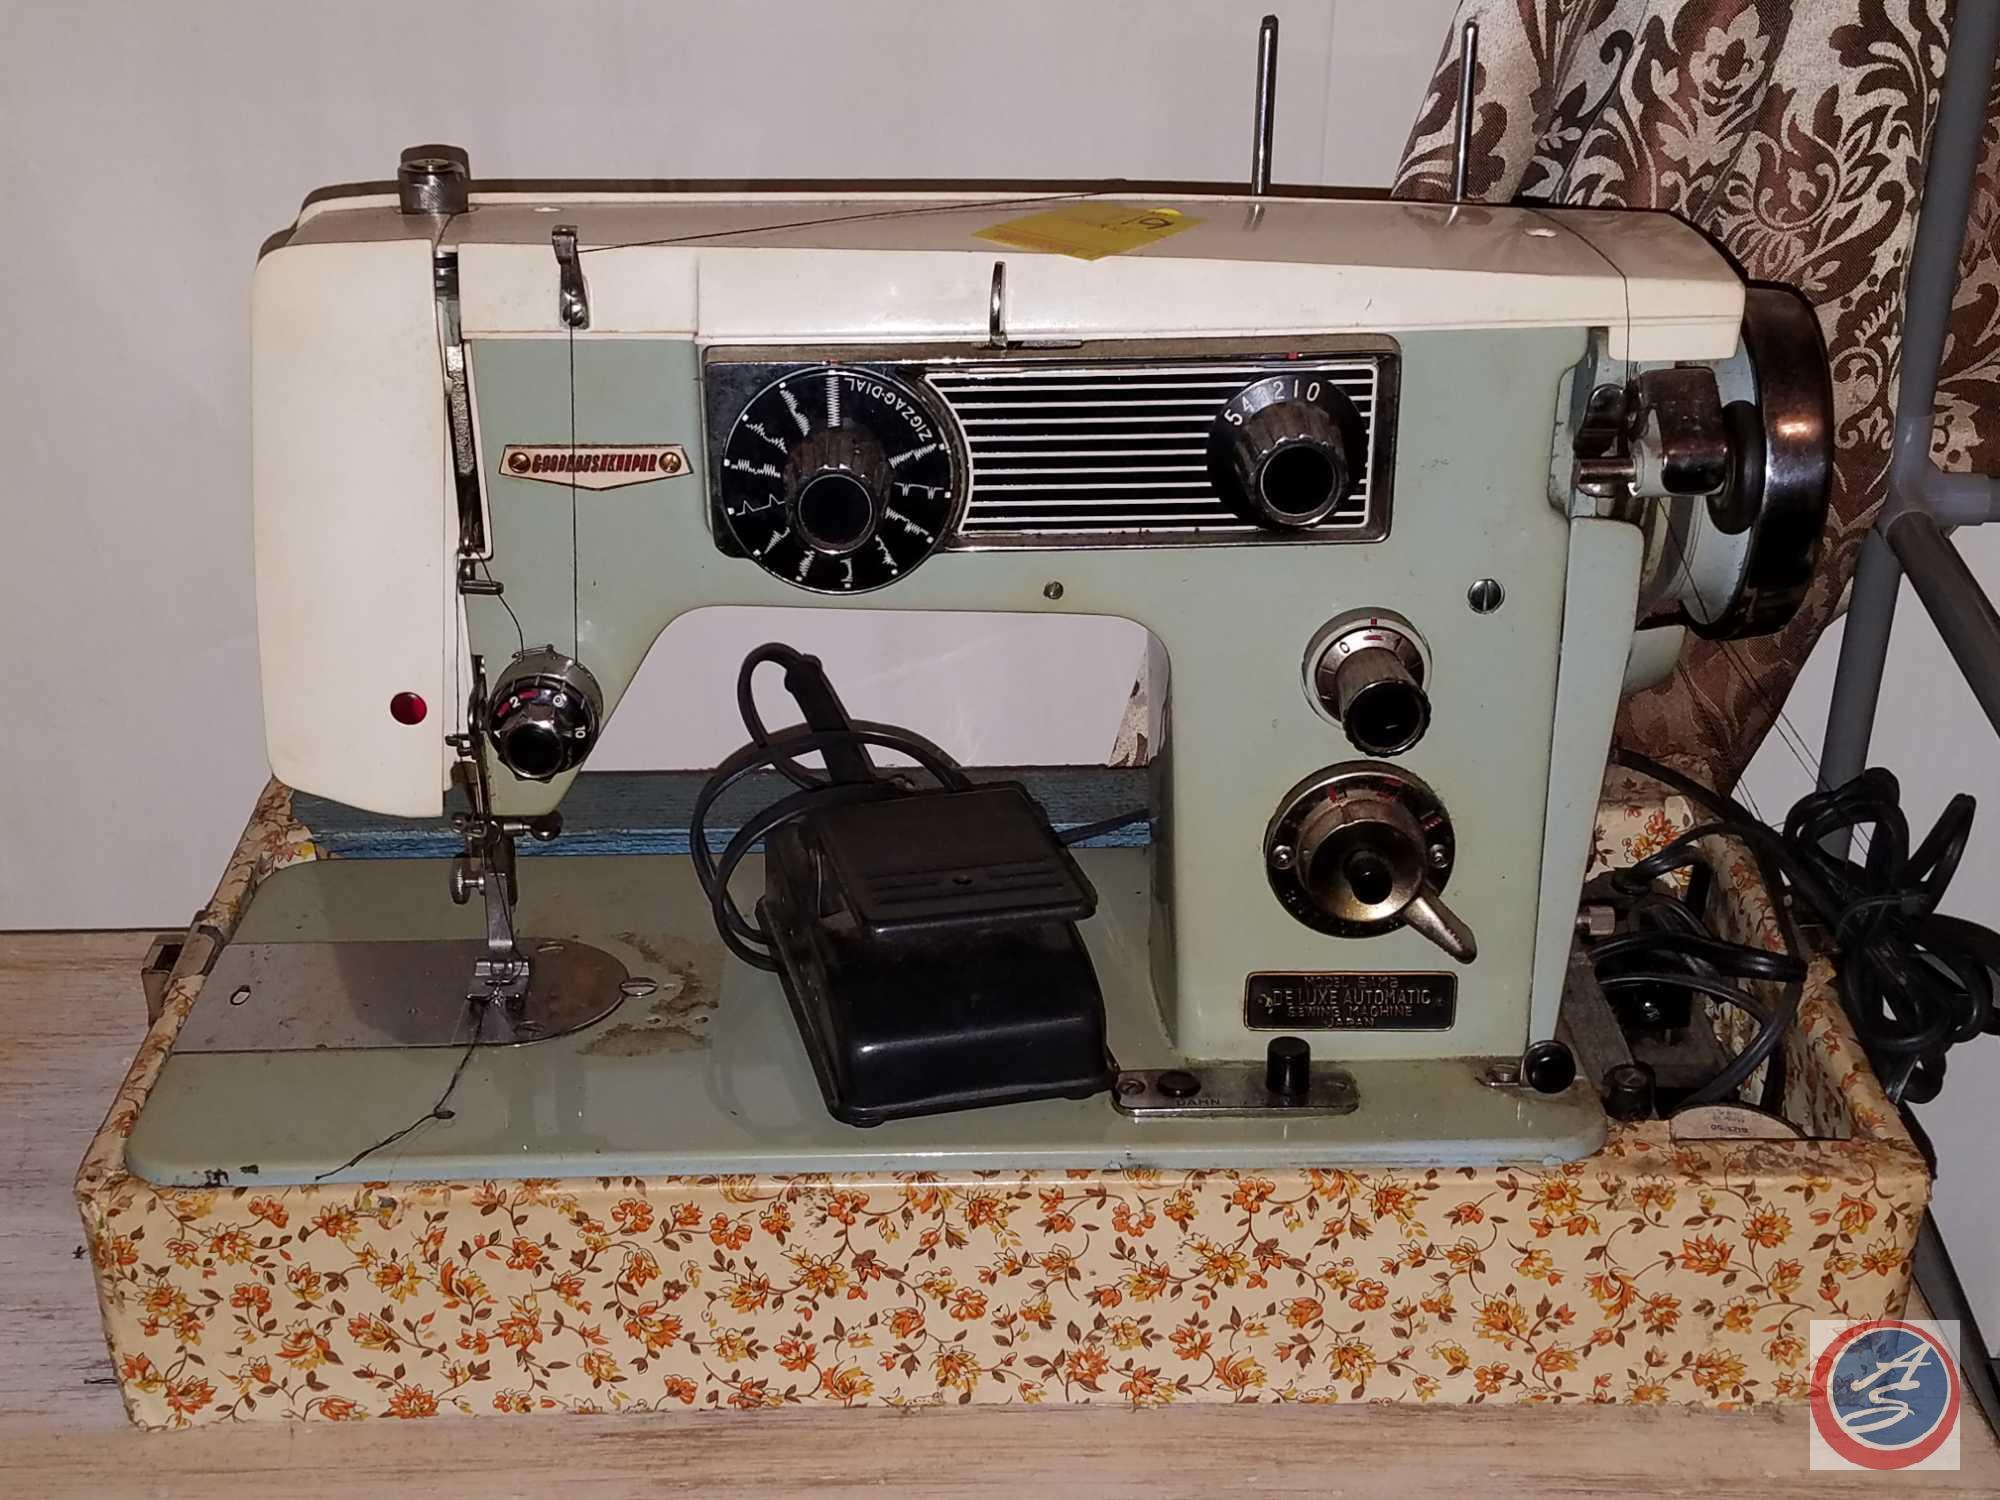 Model Sams Automatic Deluxe Sewing Machine, Shabby Chic Table 27" X 28" X 12", Cigar Box Including